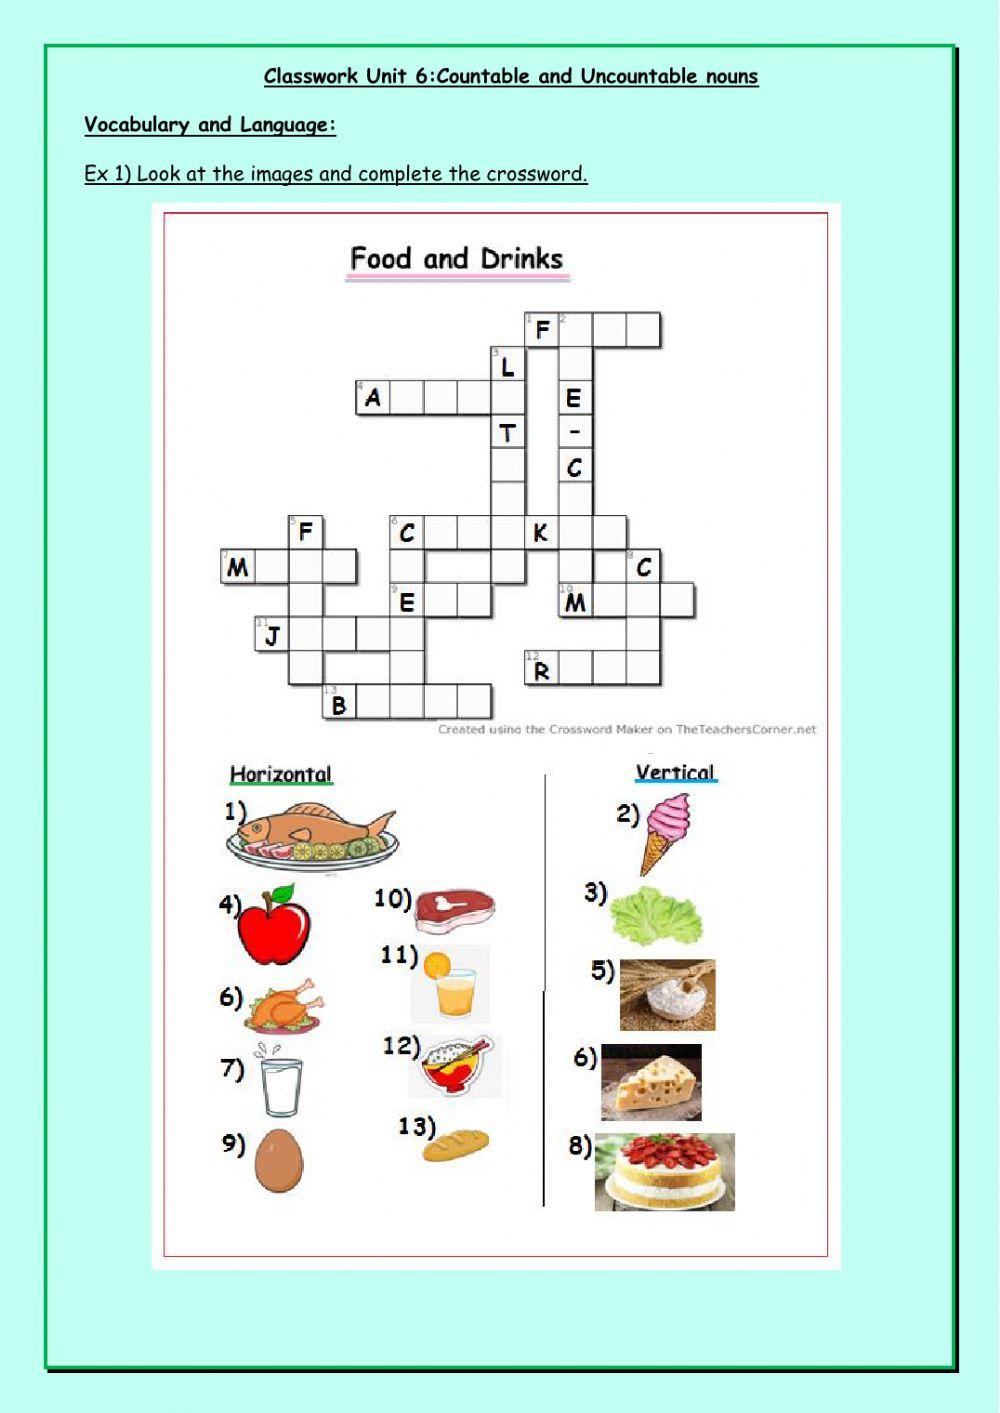 Vocabulary and Language: Food - Countable and Uncountable nouns